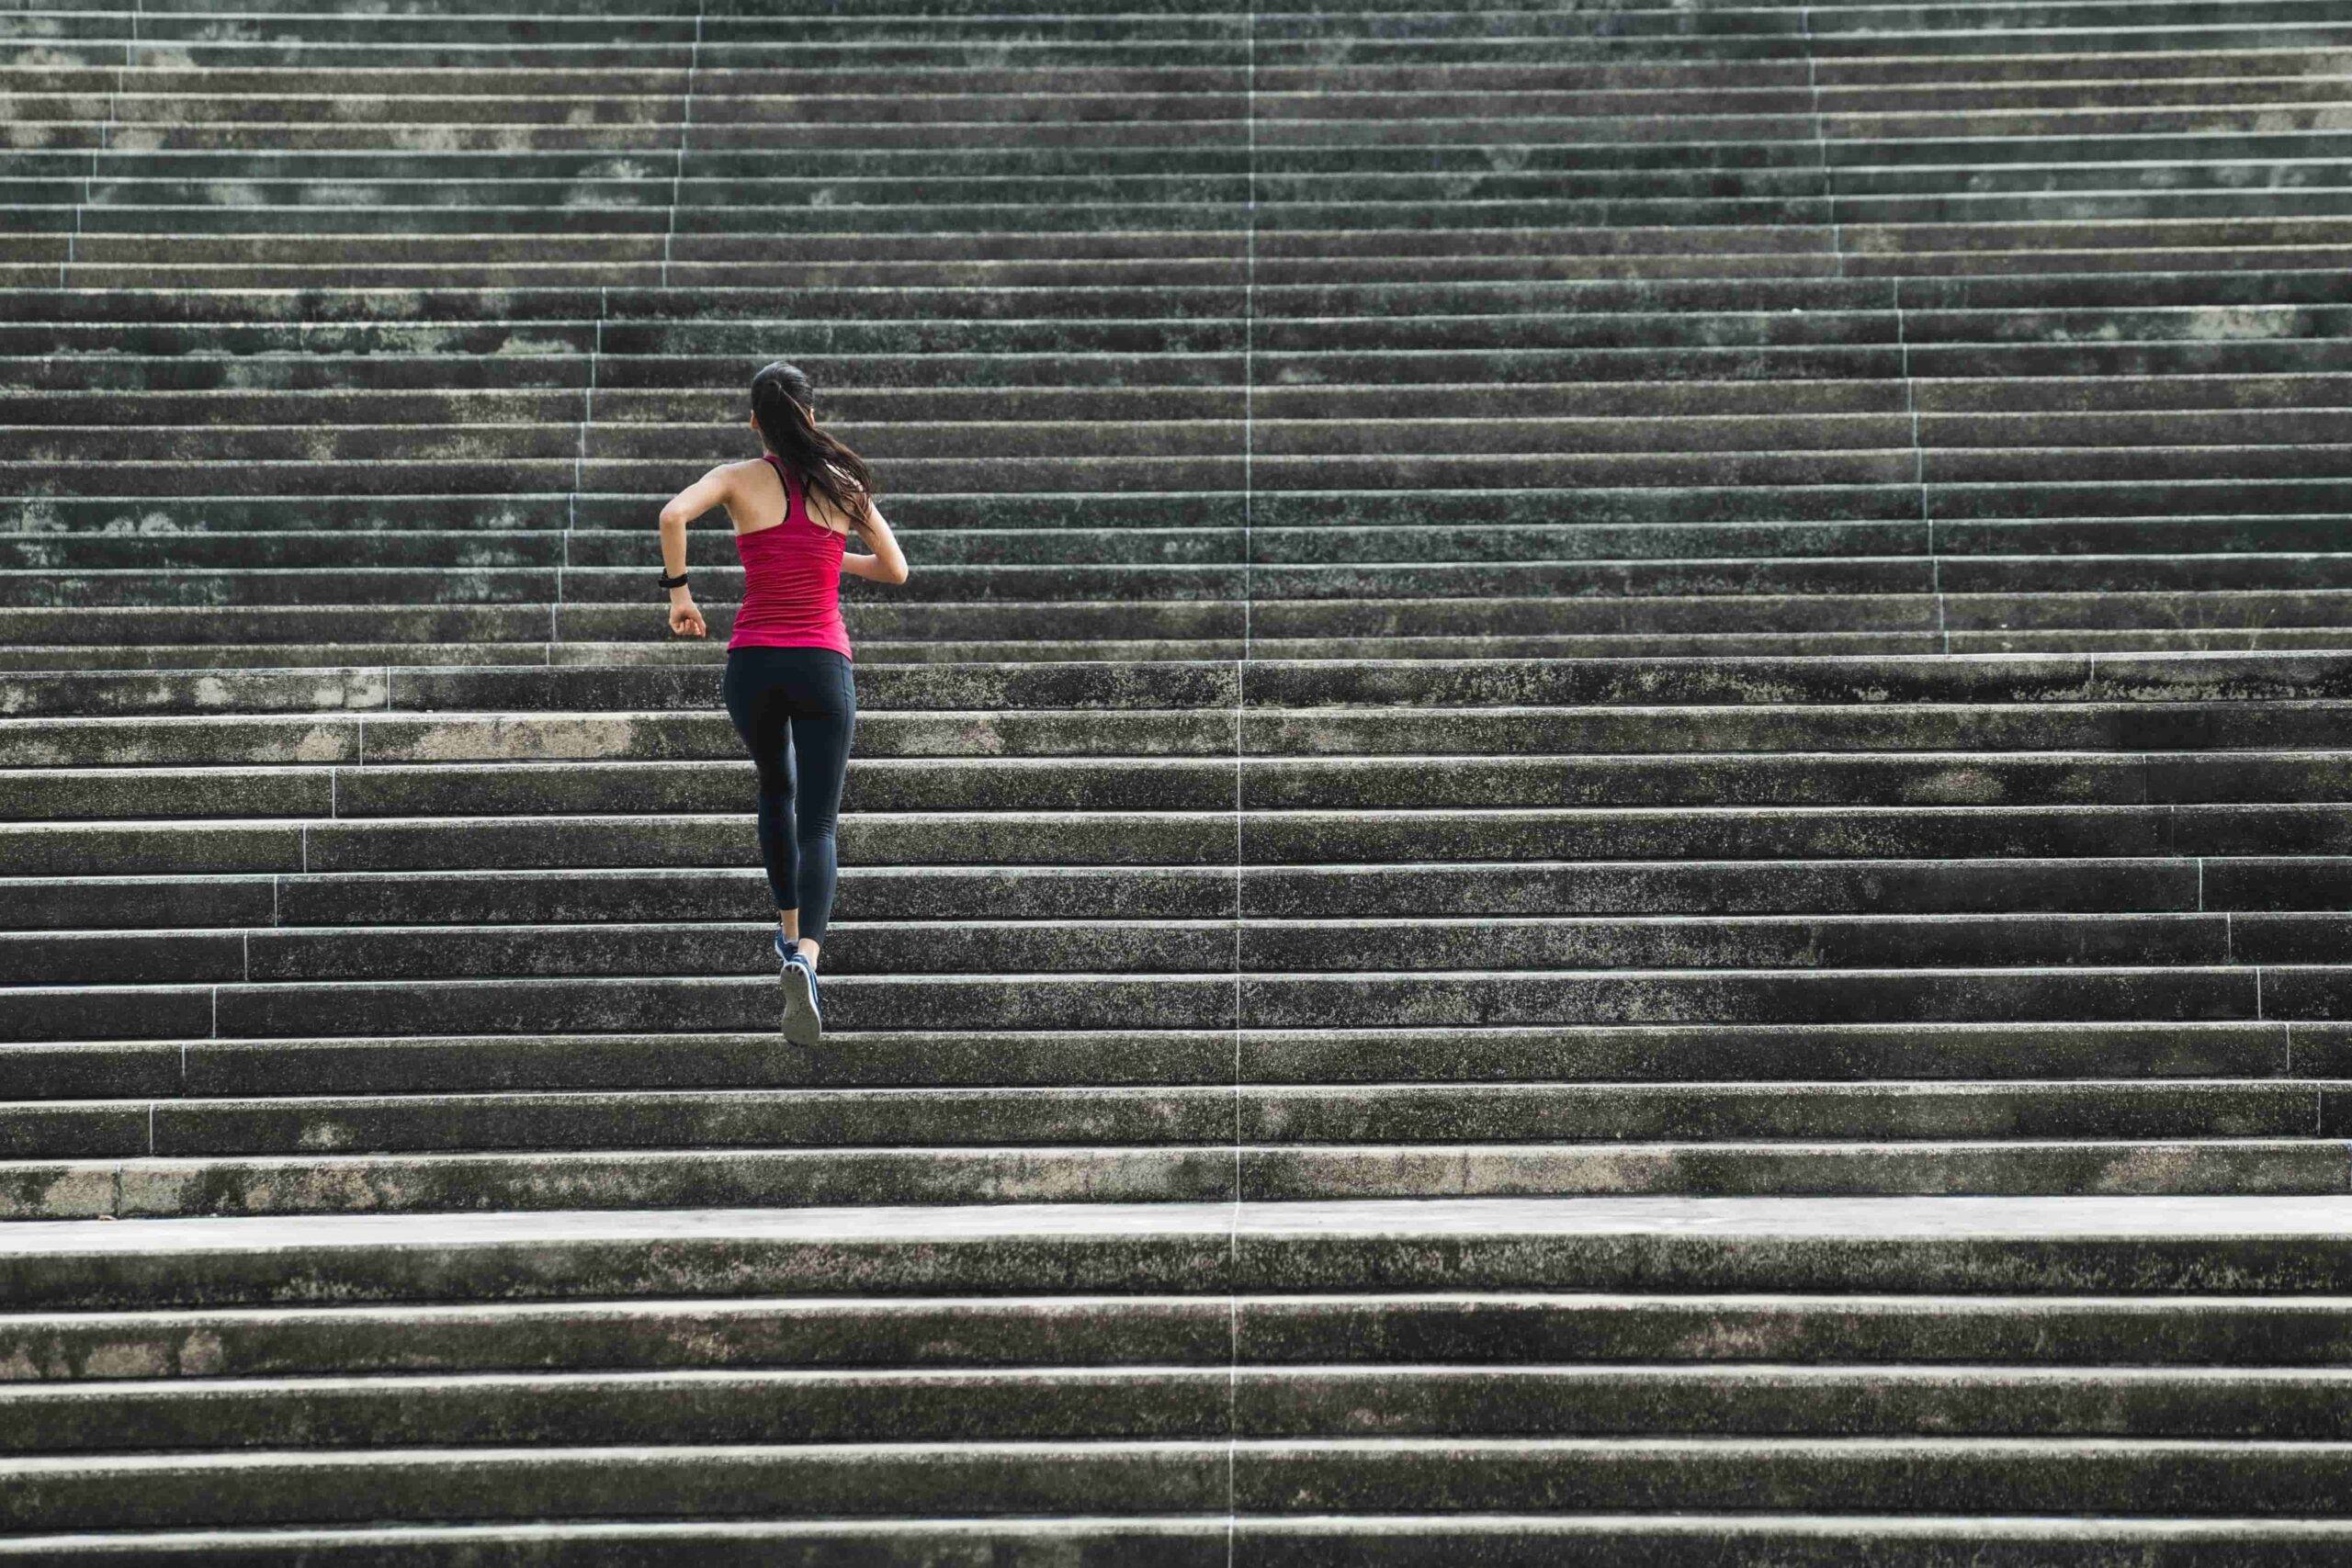 Making the Most of Stair Climbing